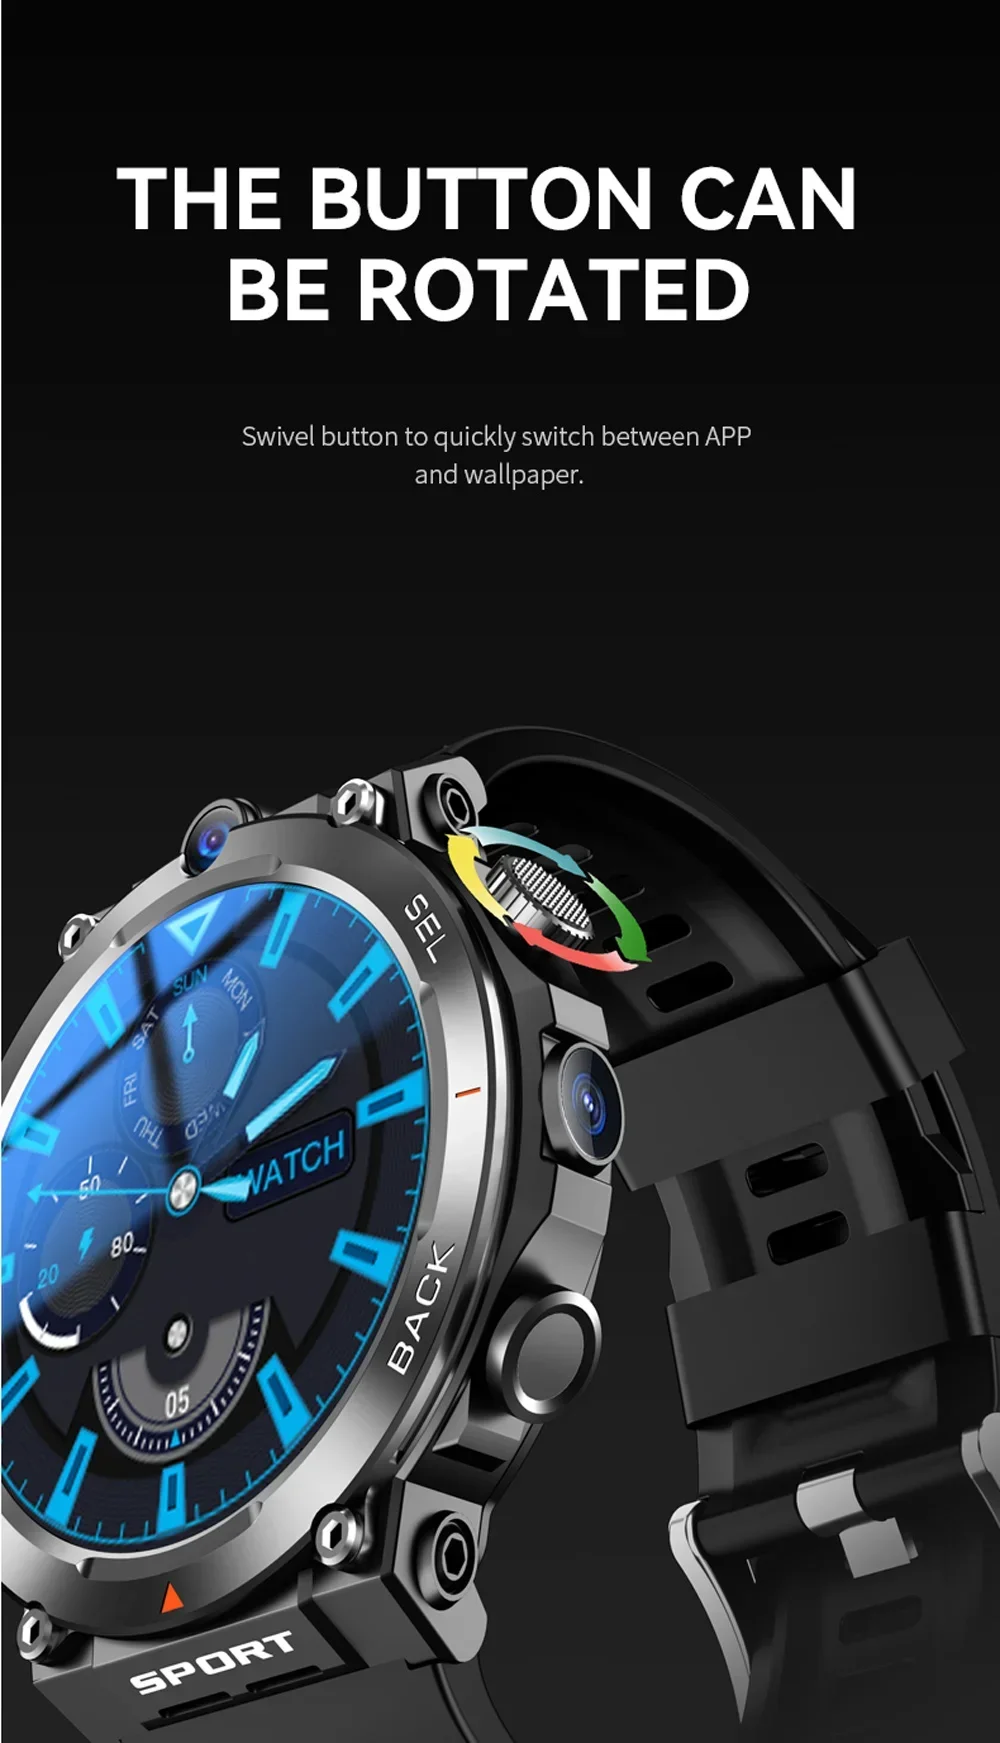 4G LTE Smartwatch For Men GPS HD Dual Camera SIM Talk NFC Heart Rate Health Monitoring Face Unlock Smart Watch For Android IOS